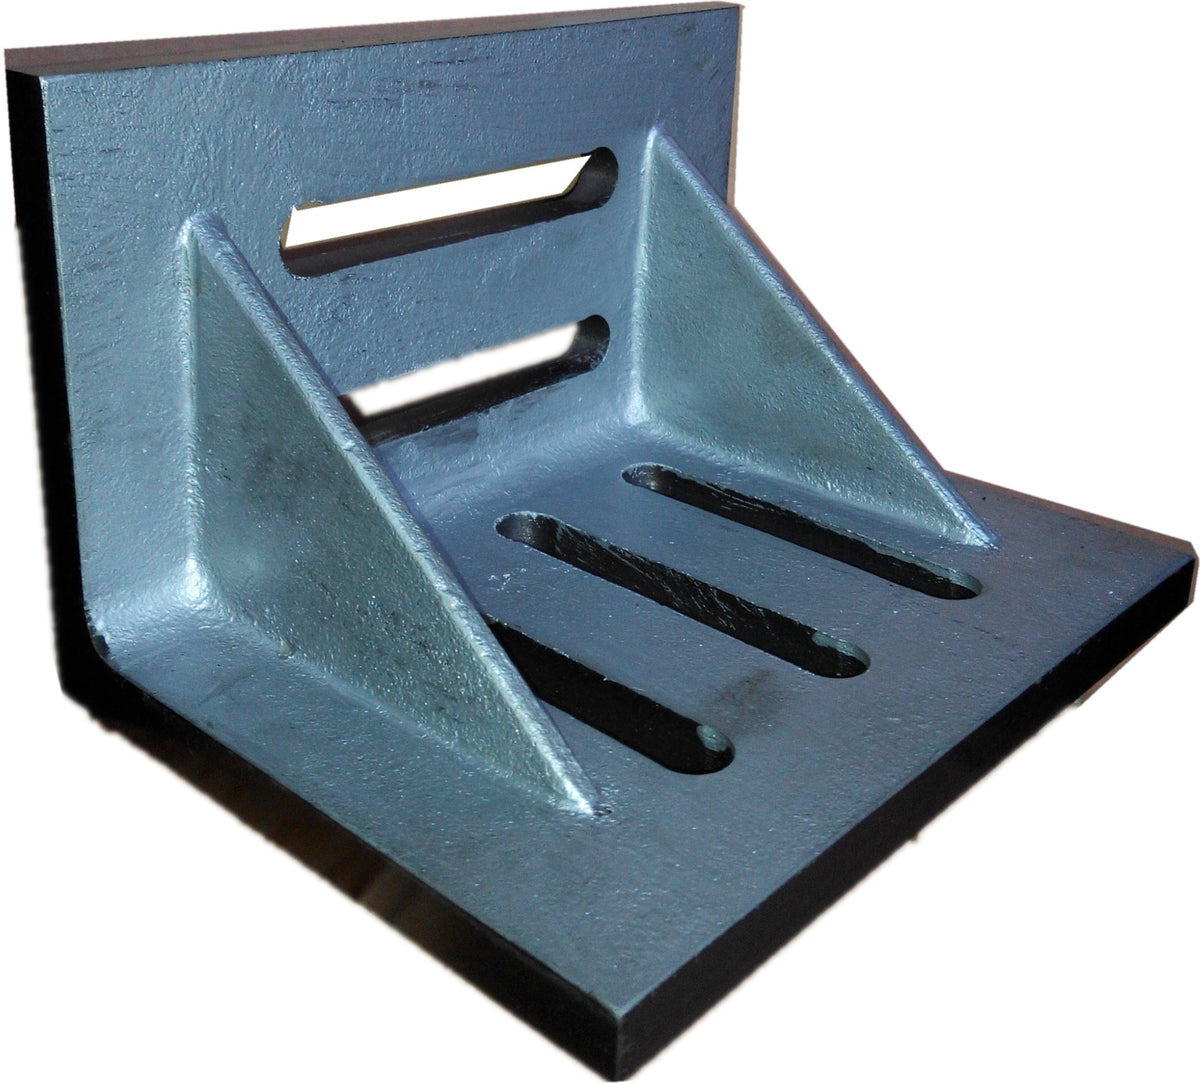 6 X 5 X 4-1/2" WEBBED SLOTTED ANGLE PLATE